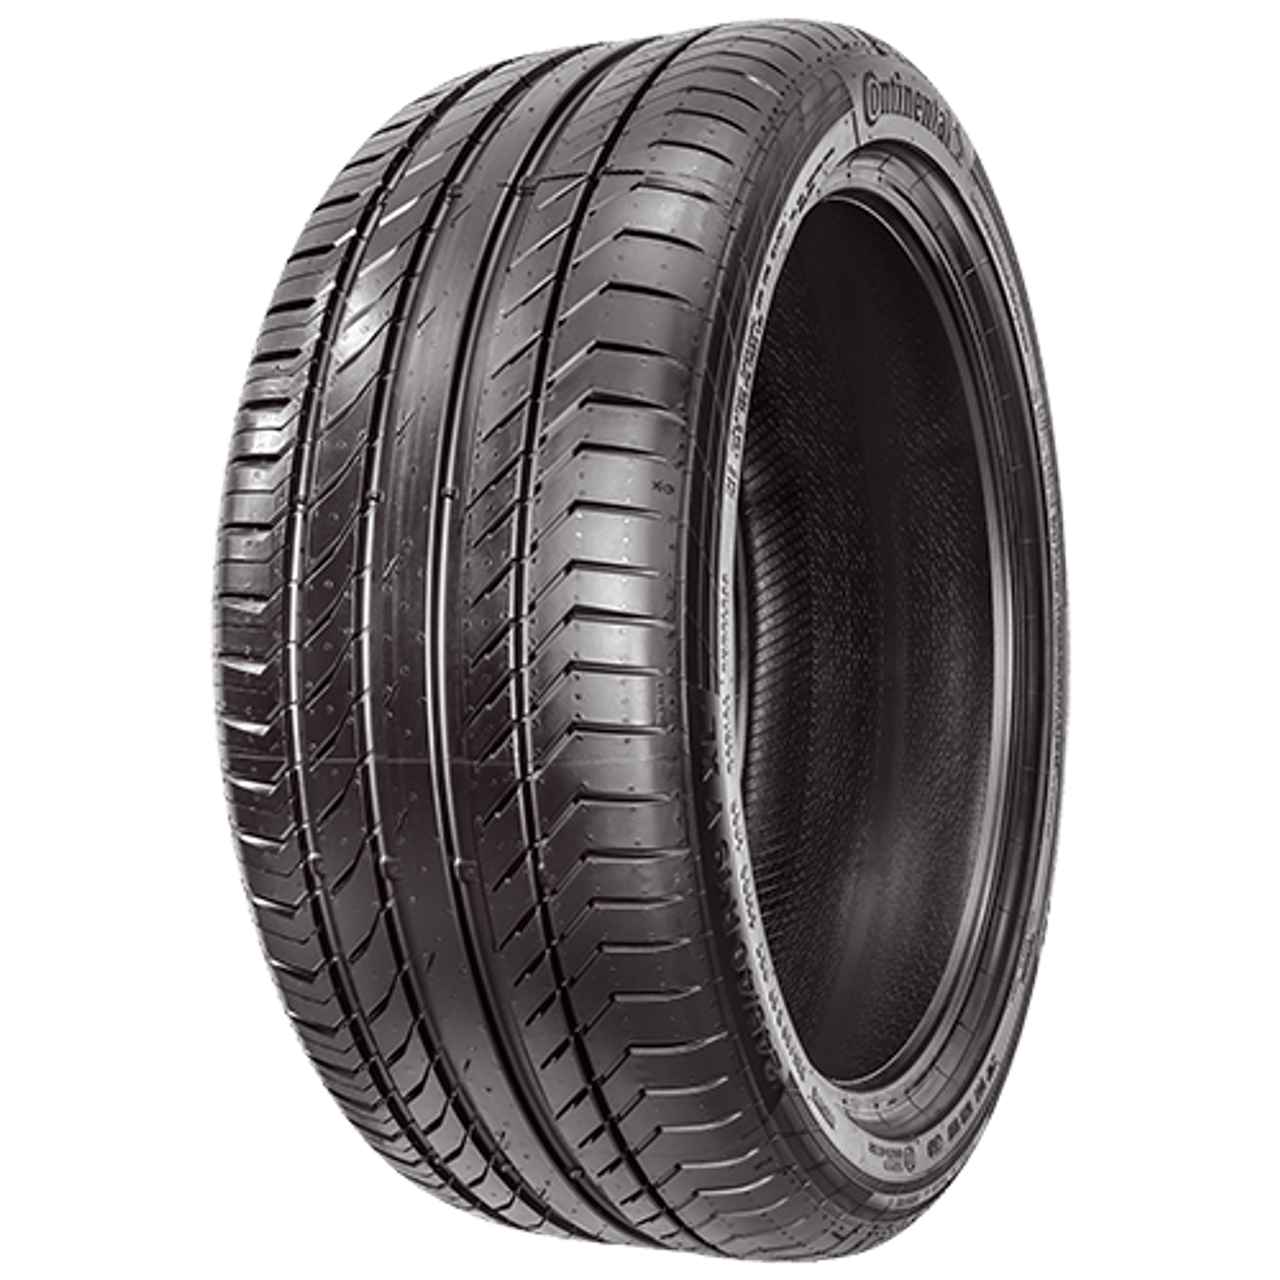 CONTINENTAL CONTISPORTCONTACT 5 (VW) 235/45R18 94W FR